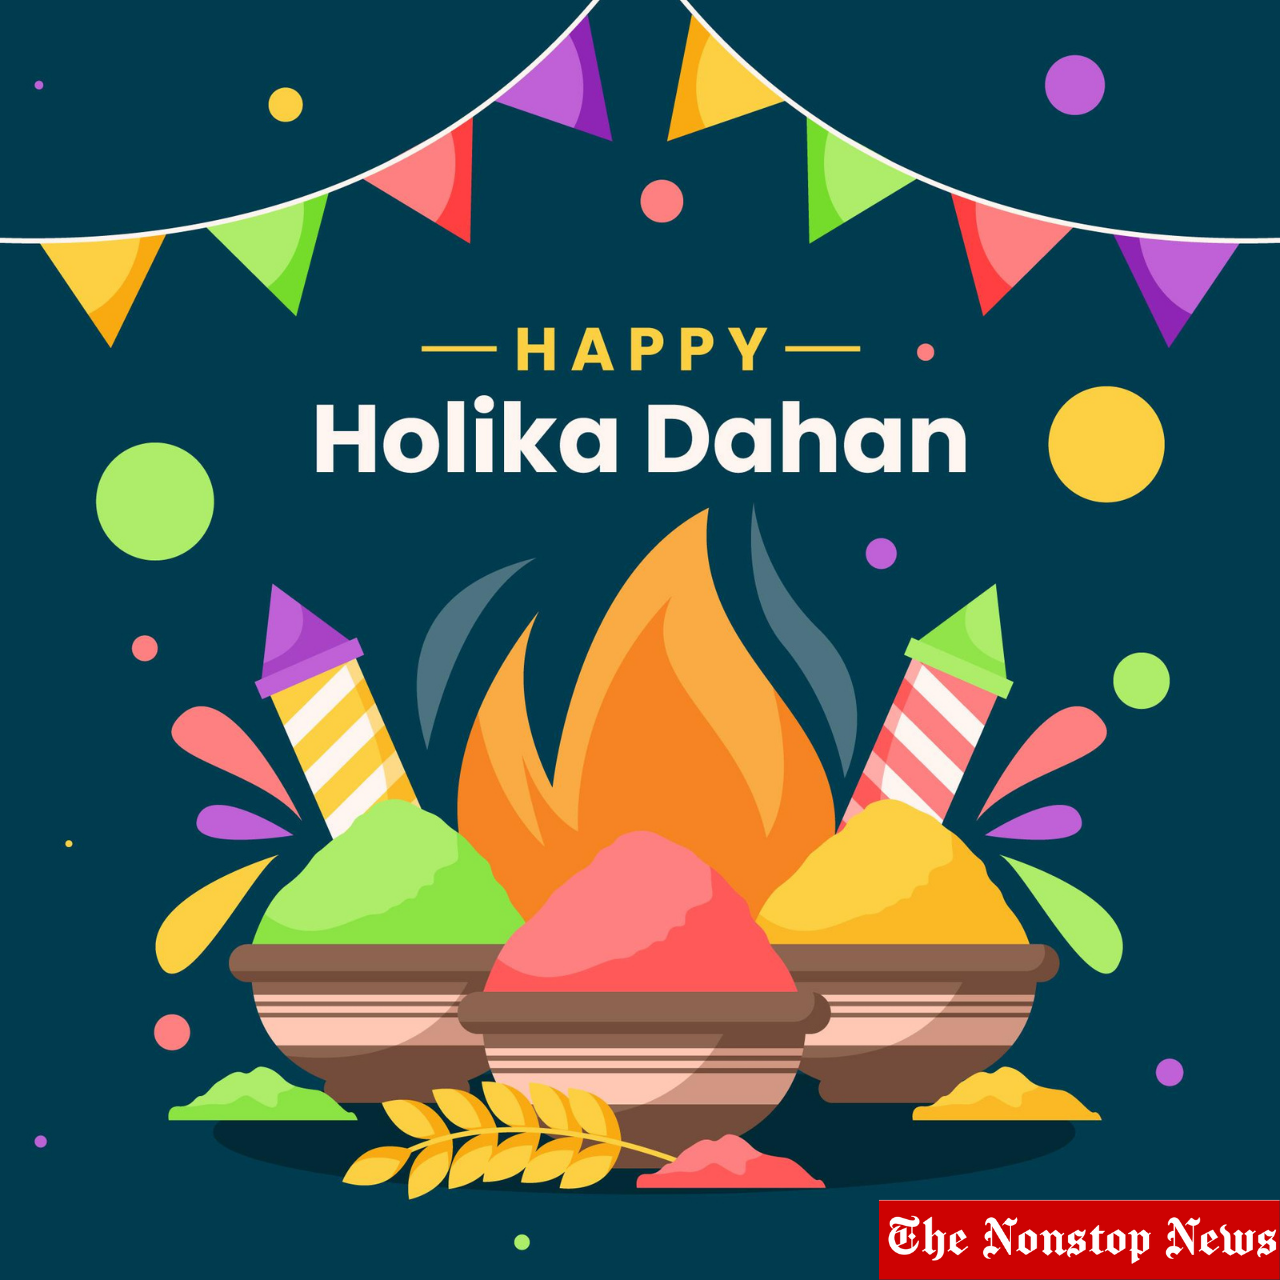 Happy Holika Dahan 2021 Images, Wishes, Greetings, Messages, and Quotes to Share